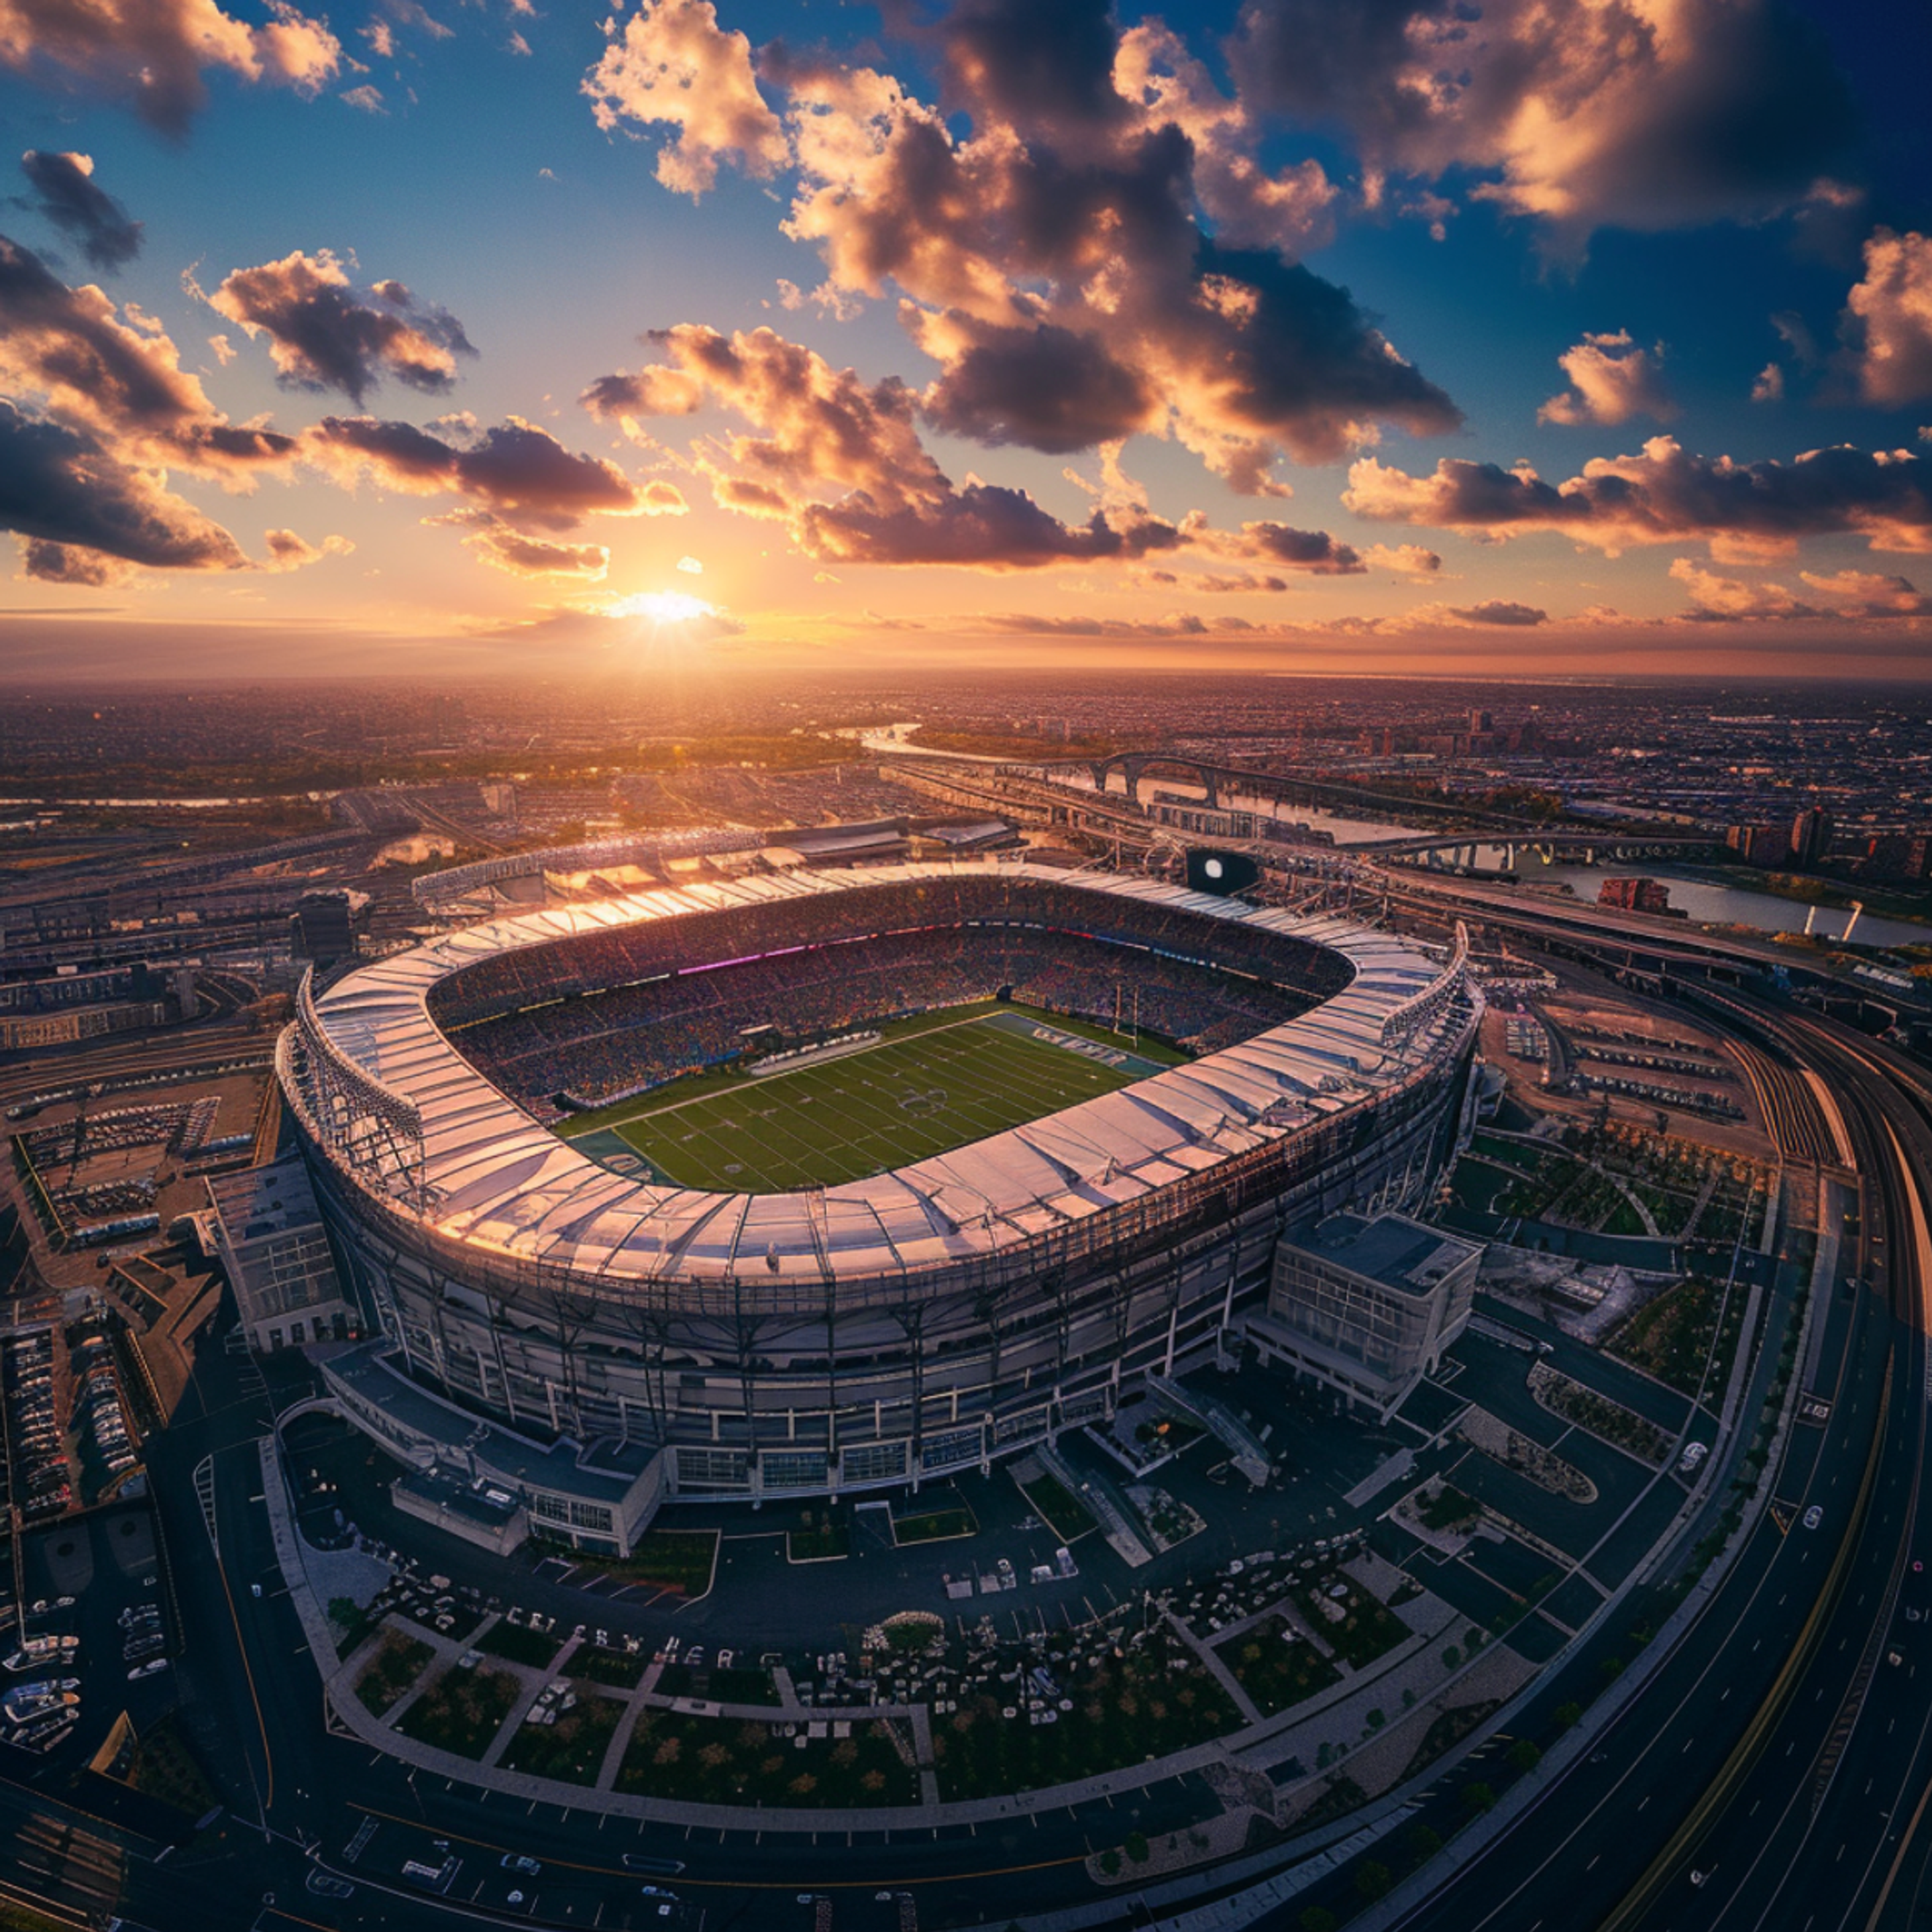 Aerial view of MetLife Stadium in East Rutherford, New Jersey, during a packed event at sunset with radiant sunbeams piercing through scattered clouds, highlighting the bustling activity and the expansive urban landscape in the background.